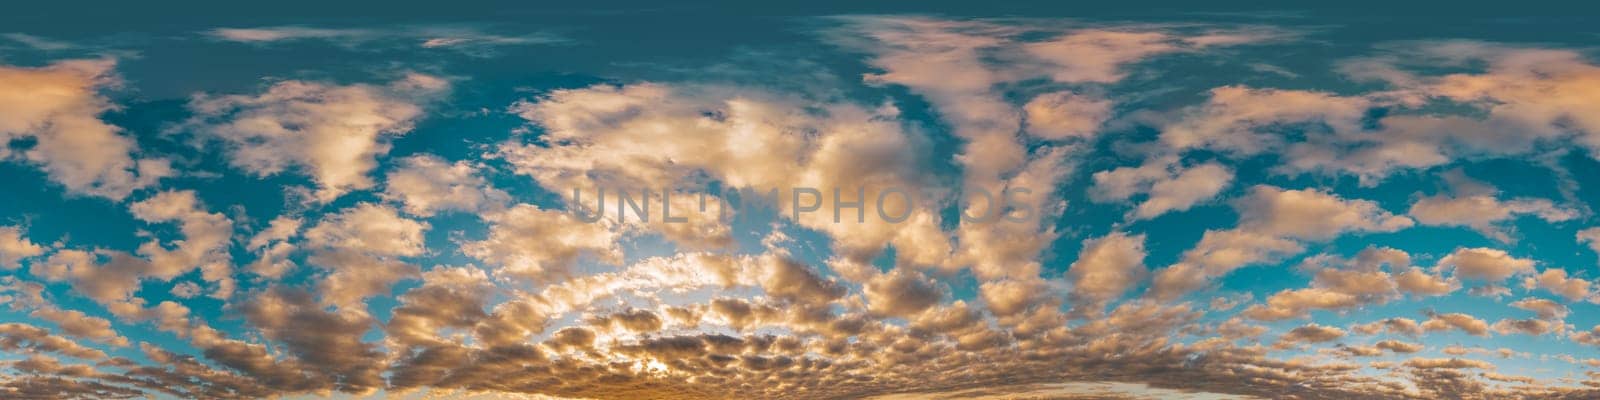 Sunset sky with bright glowing pink Cumulus clouds. Seamless spherical HDR 360 panorama. Full zenith or sky dome in 3D, sky replacement for aerial drone panoramas. Climate and weather change. by Matiunina